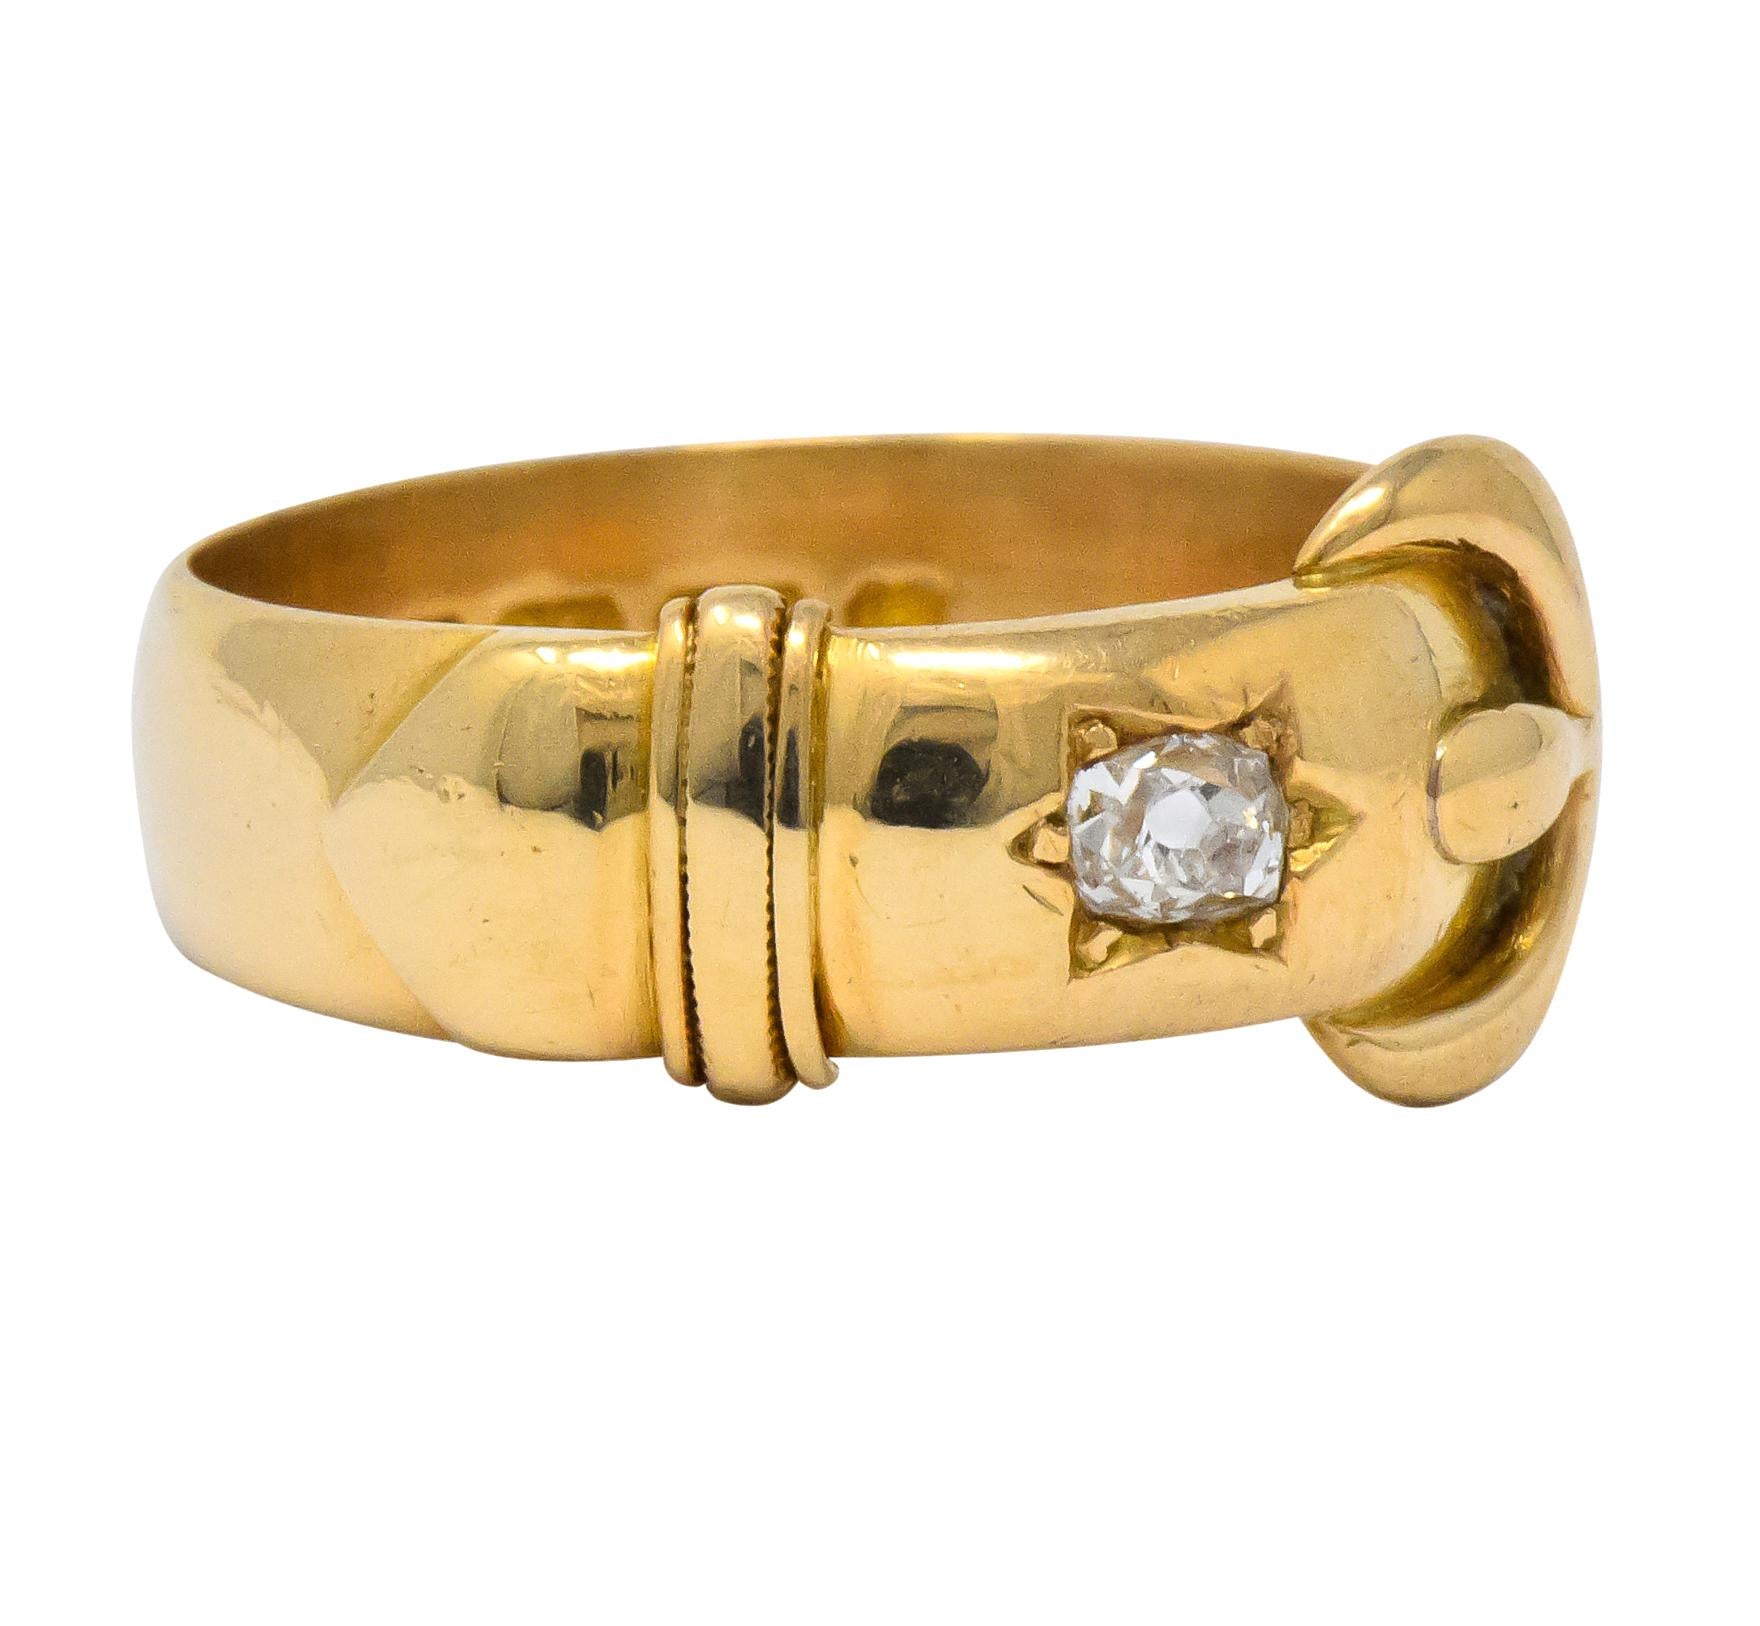 Band style ring designed as polished gold buckle

Centering a star set old mine cut diamond weighing approximately 0.18 carat, H color and SI1 clarity

Stamped 18 with maker's mark for Walker & Hall

British hallmarks for gold, 18 karat, Birmingham,